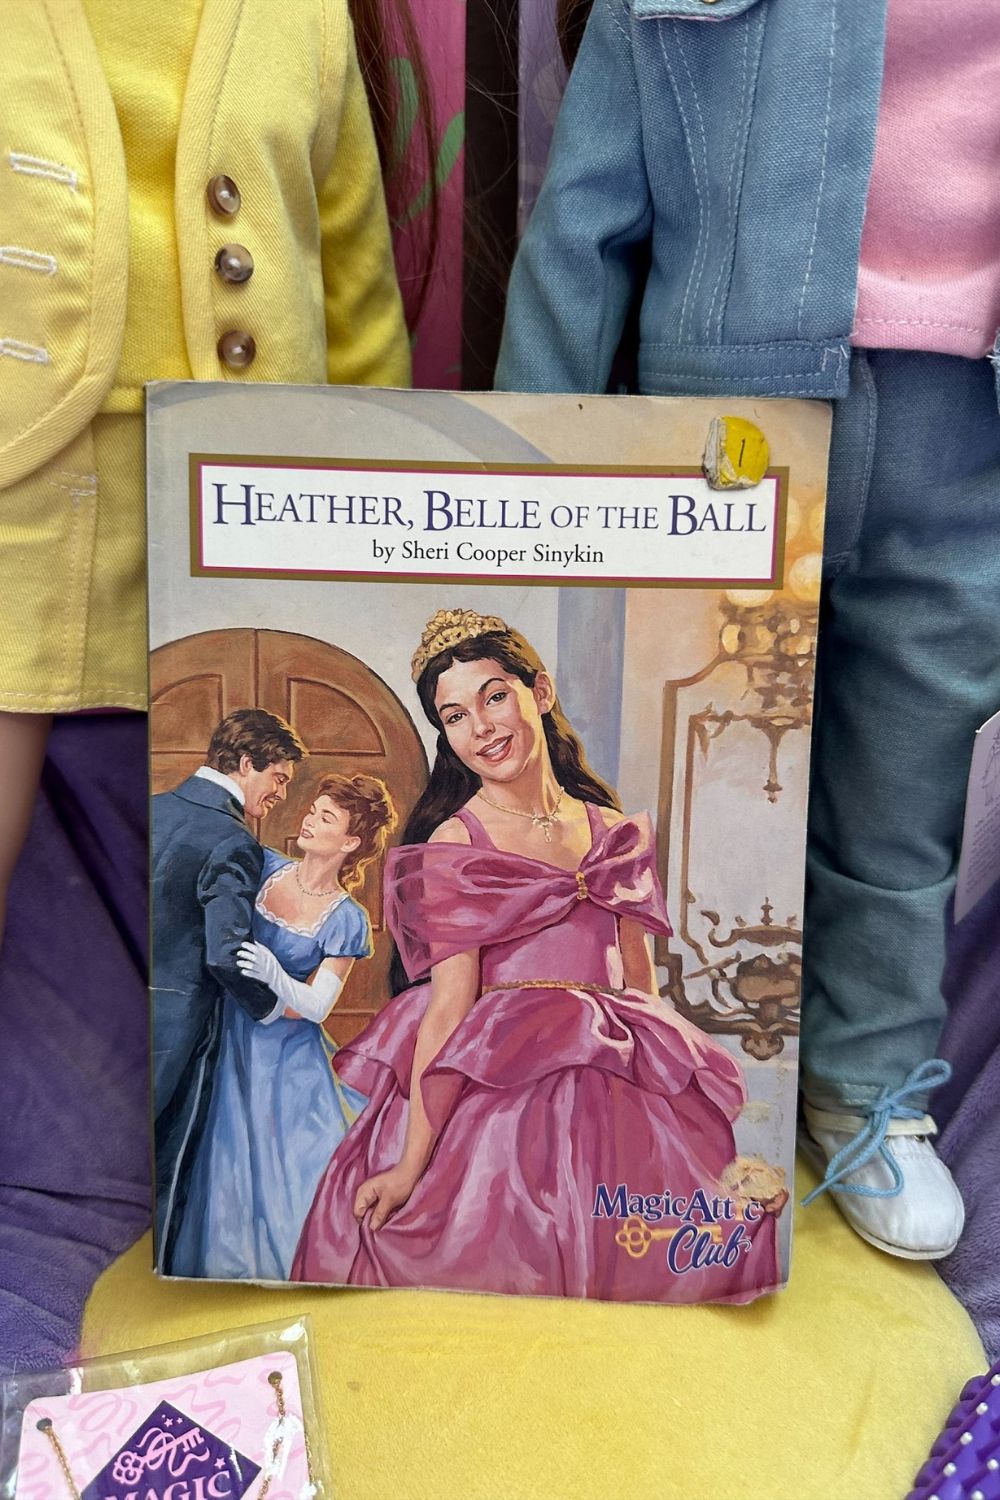 HEATHER, BELLE OF THE BALL BOOK*